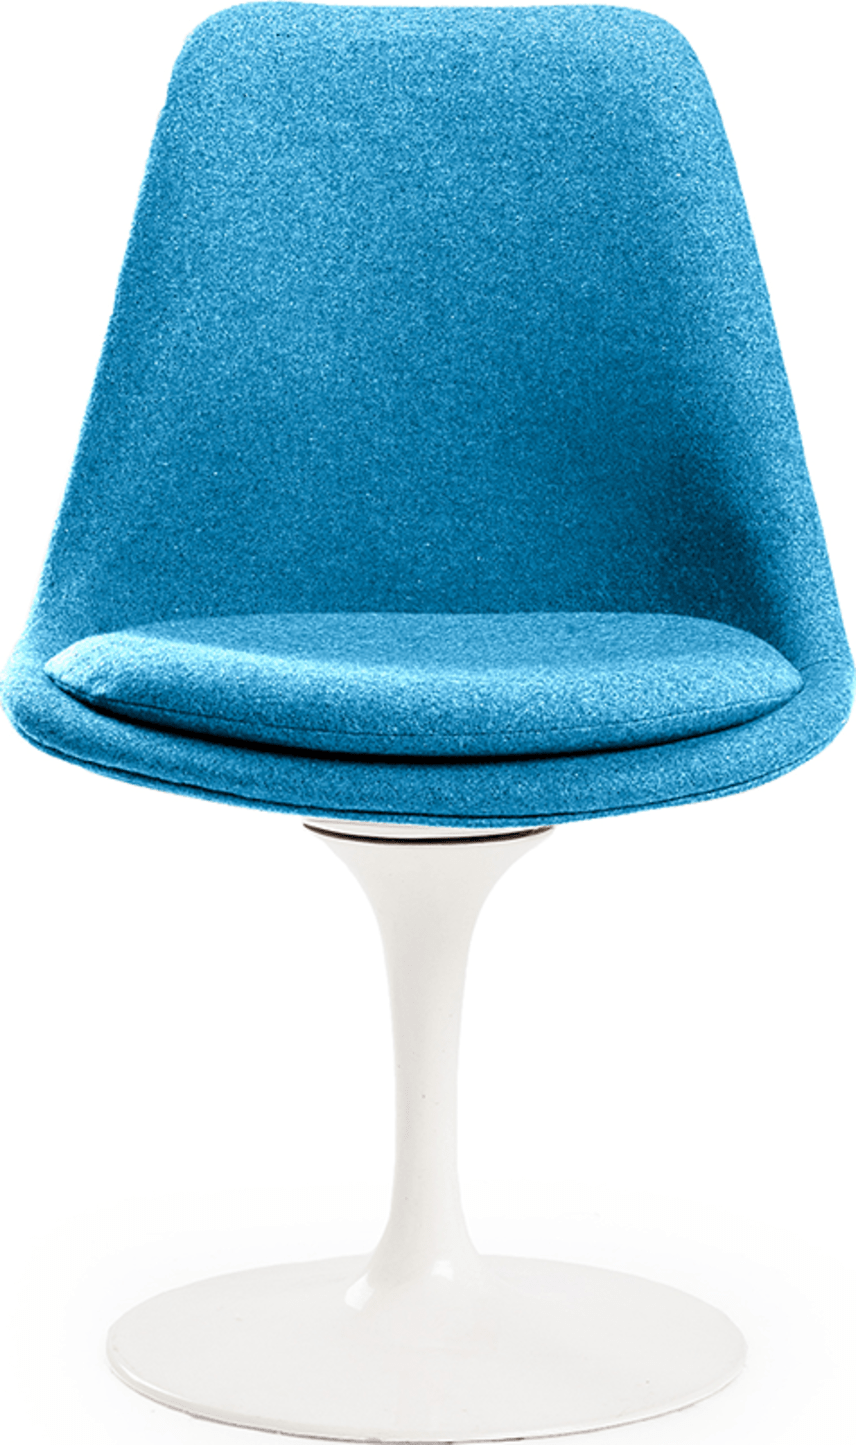 Tulip Chair Upholstered Moroccan Blue image.